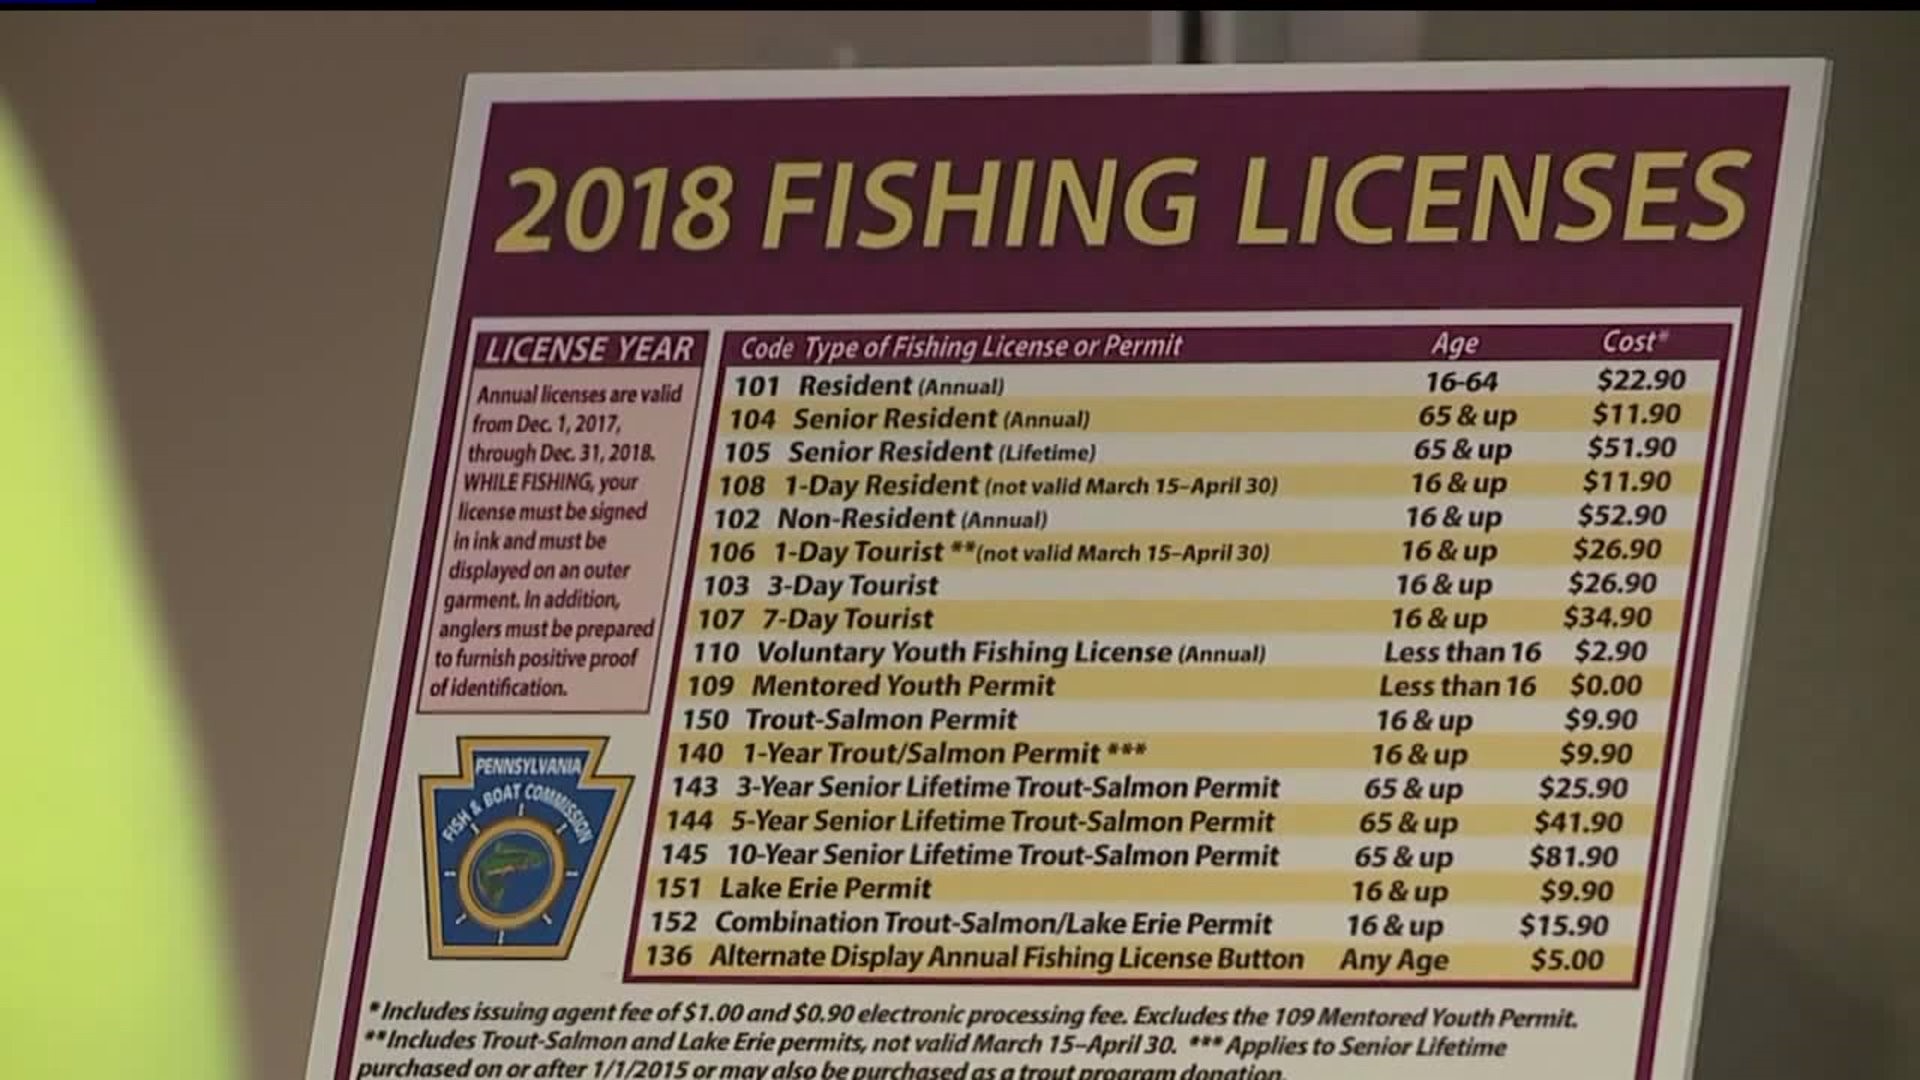 New fees proposed by PA Fish & Boat Commission